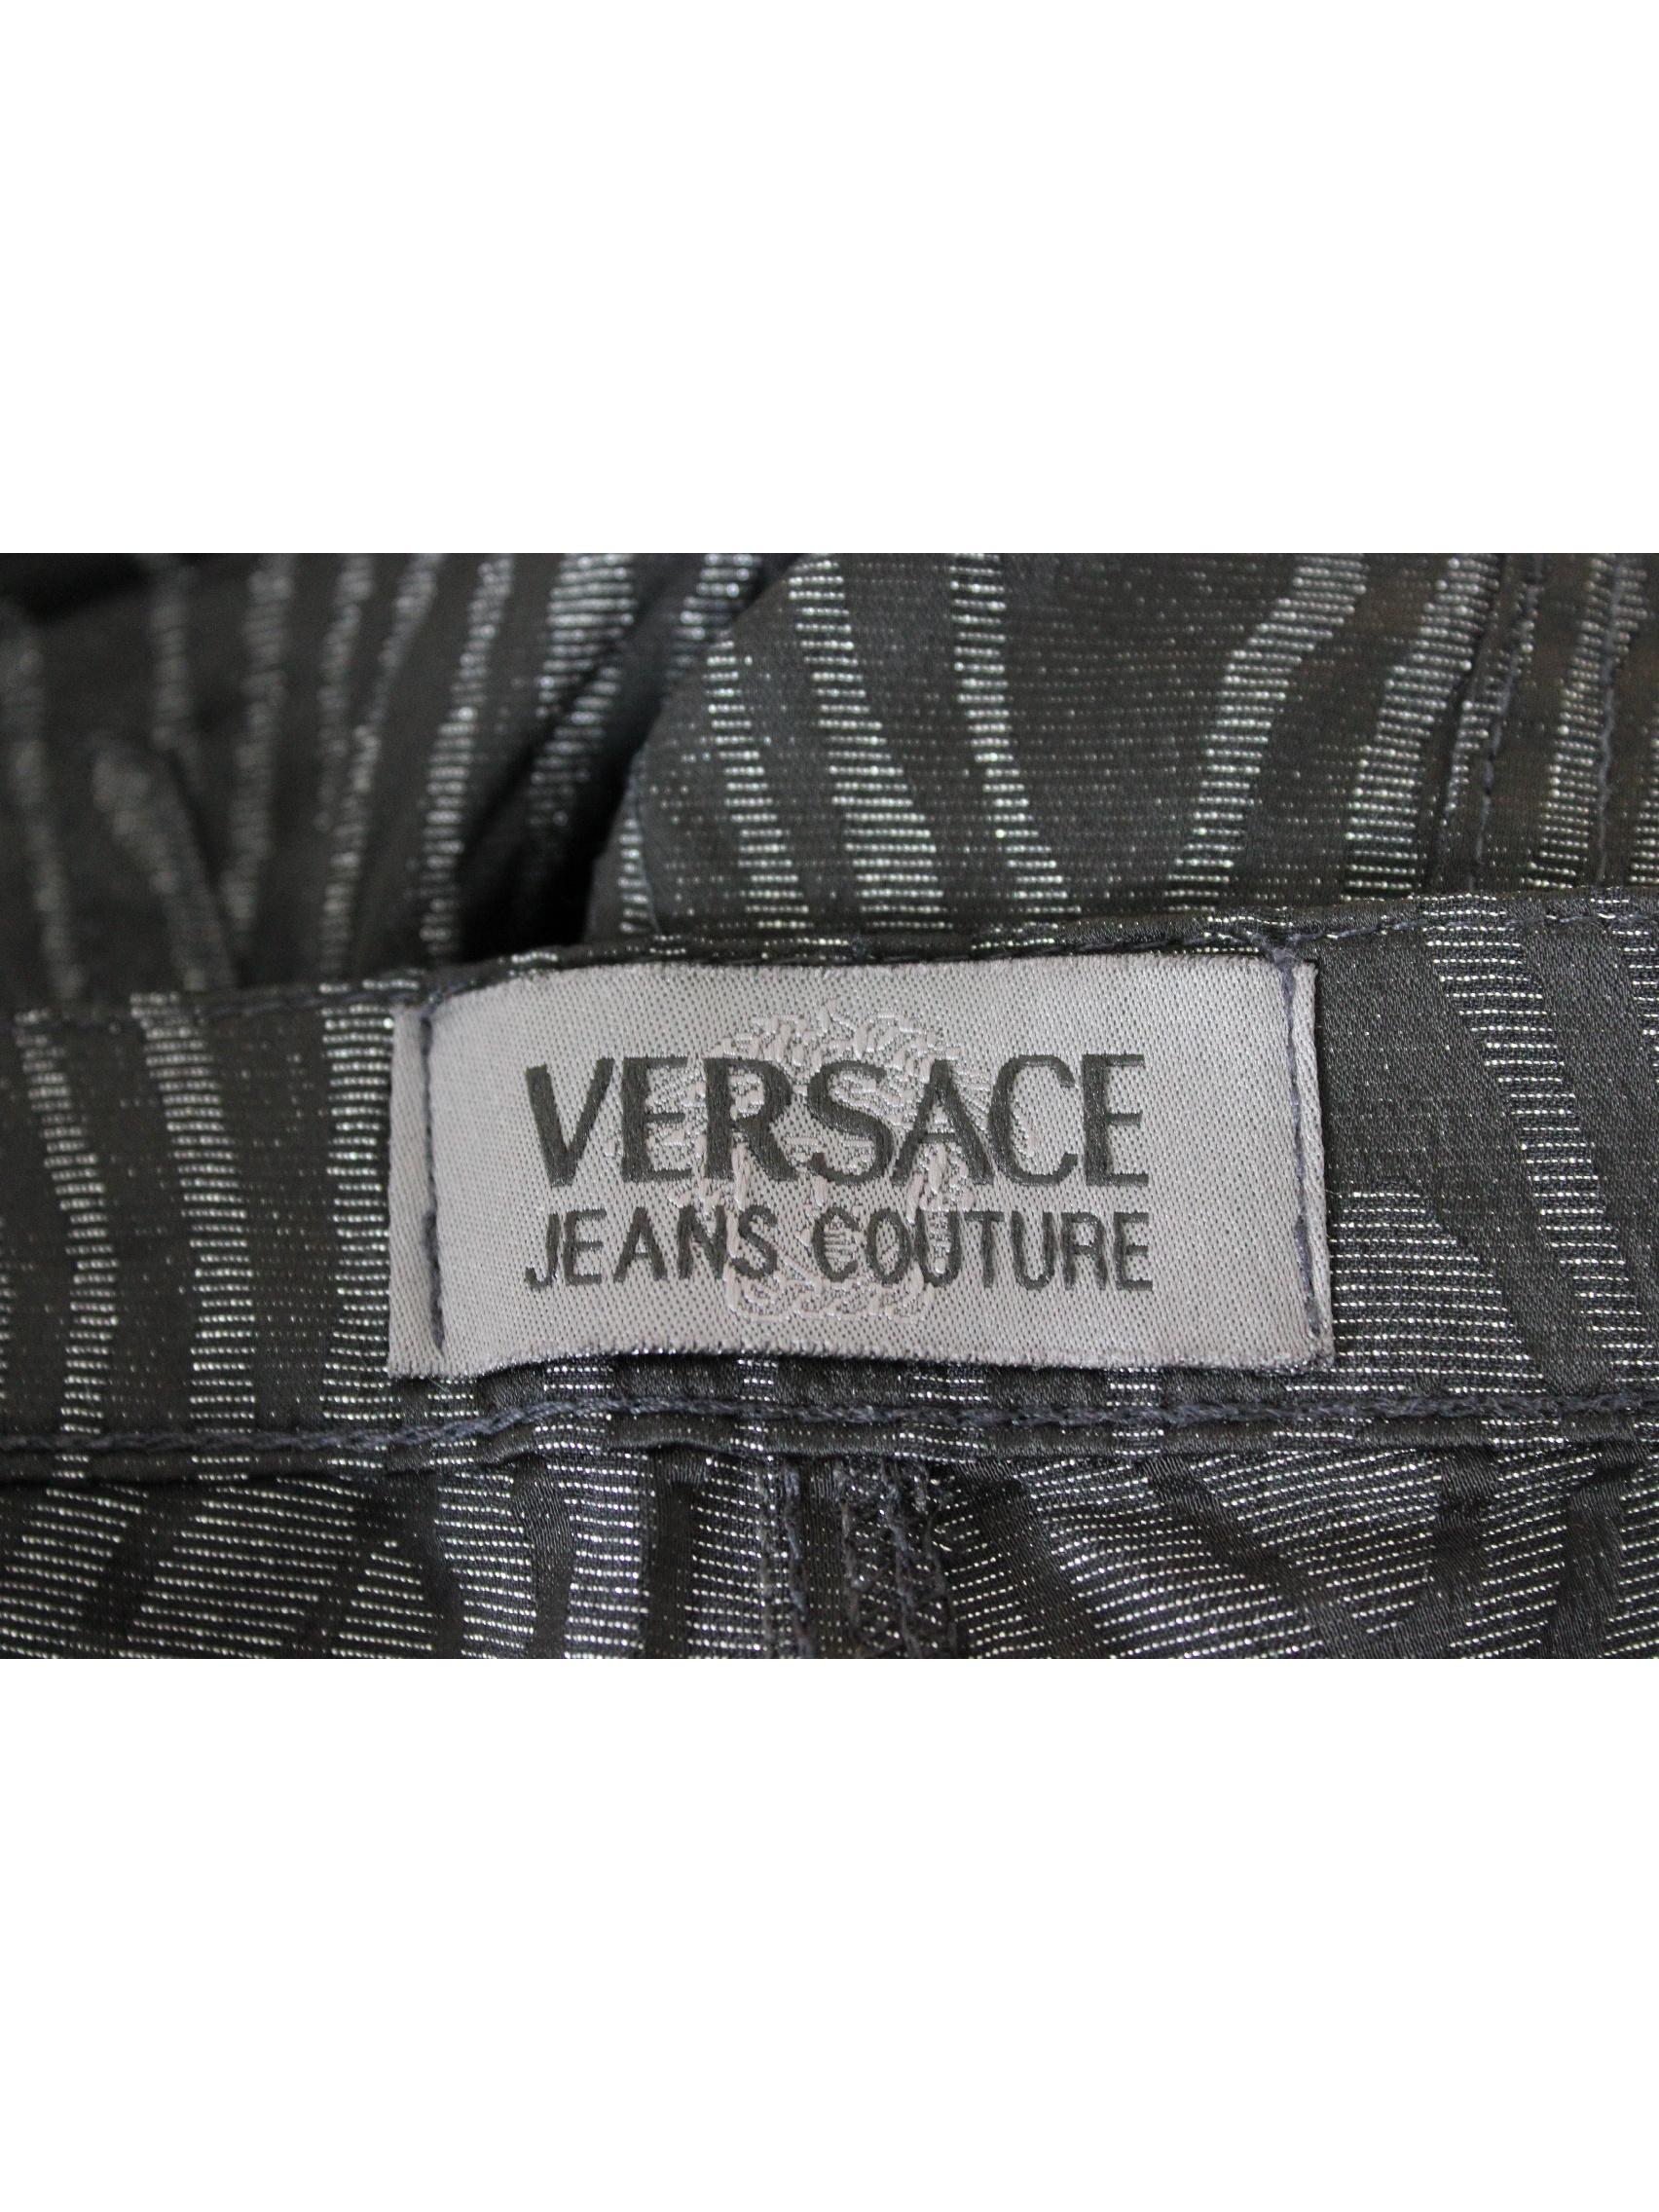 Gianni Versace Jeans Couture Pants Spotted Lurex Vintage Black Gray, 1990s 5